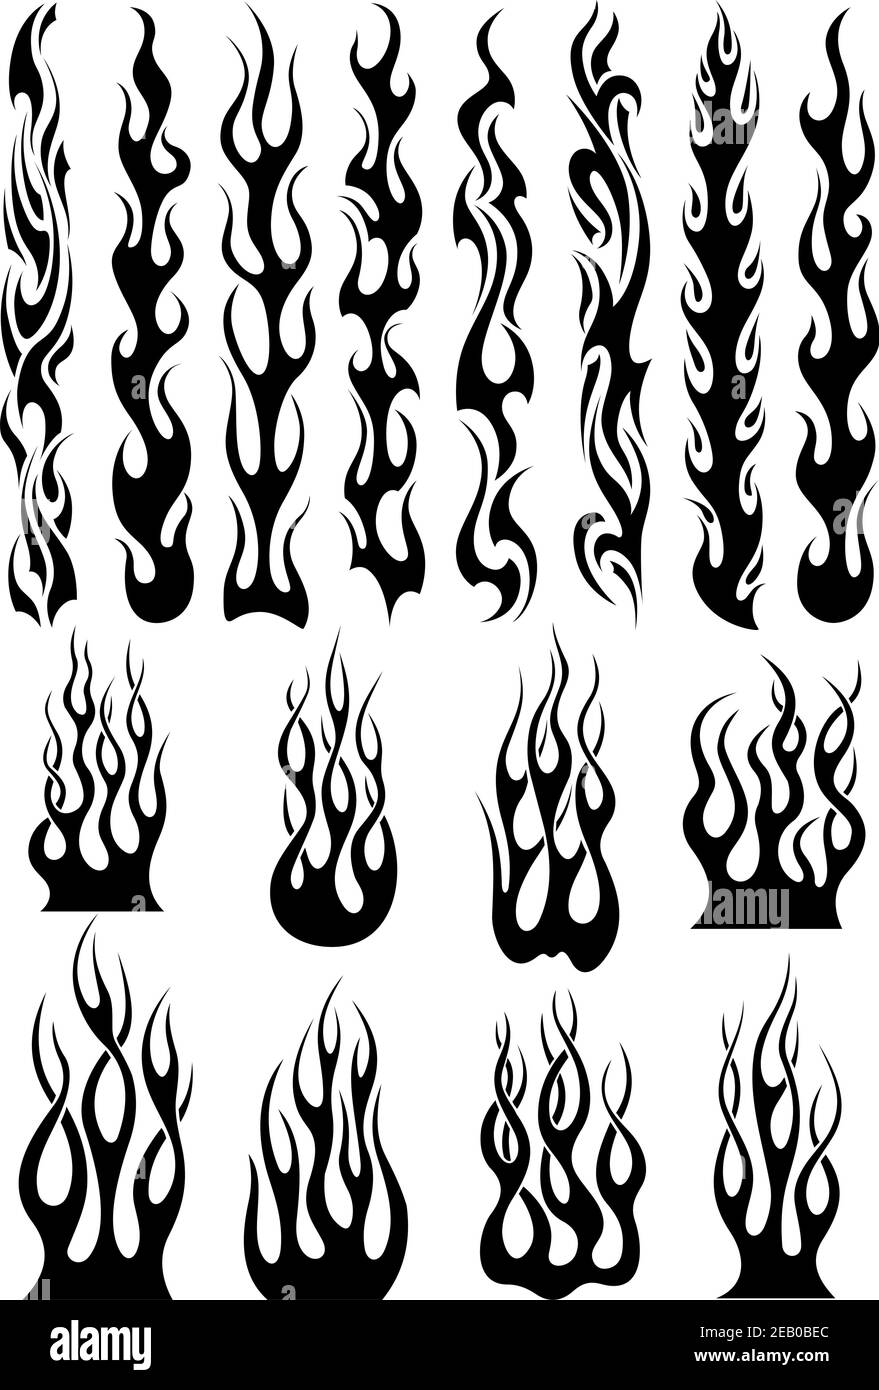 Learn 102+ about fire tattoo designs unmissable - in.daotaonec